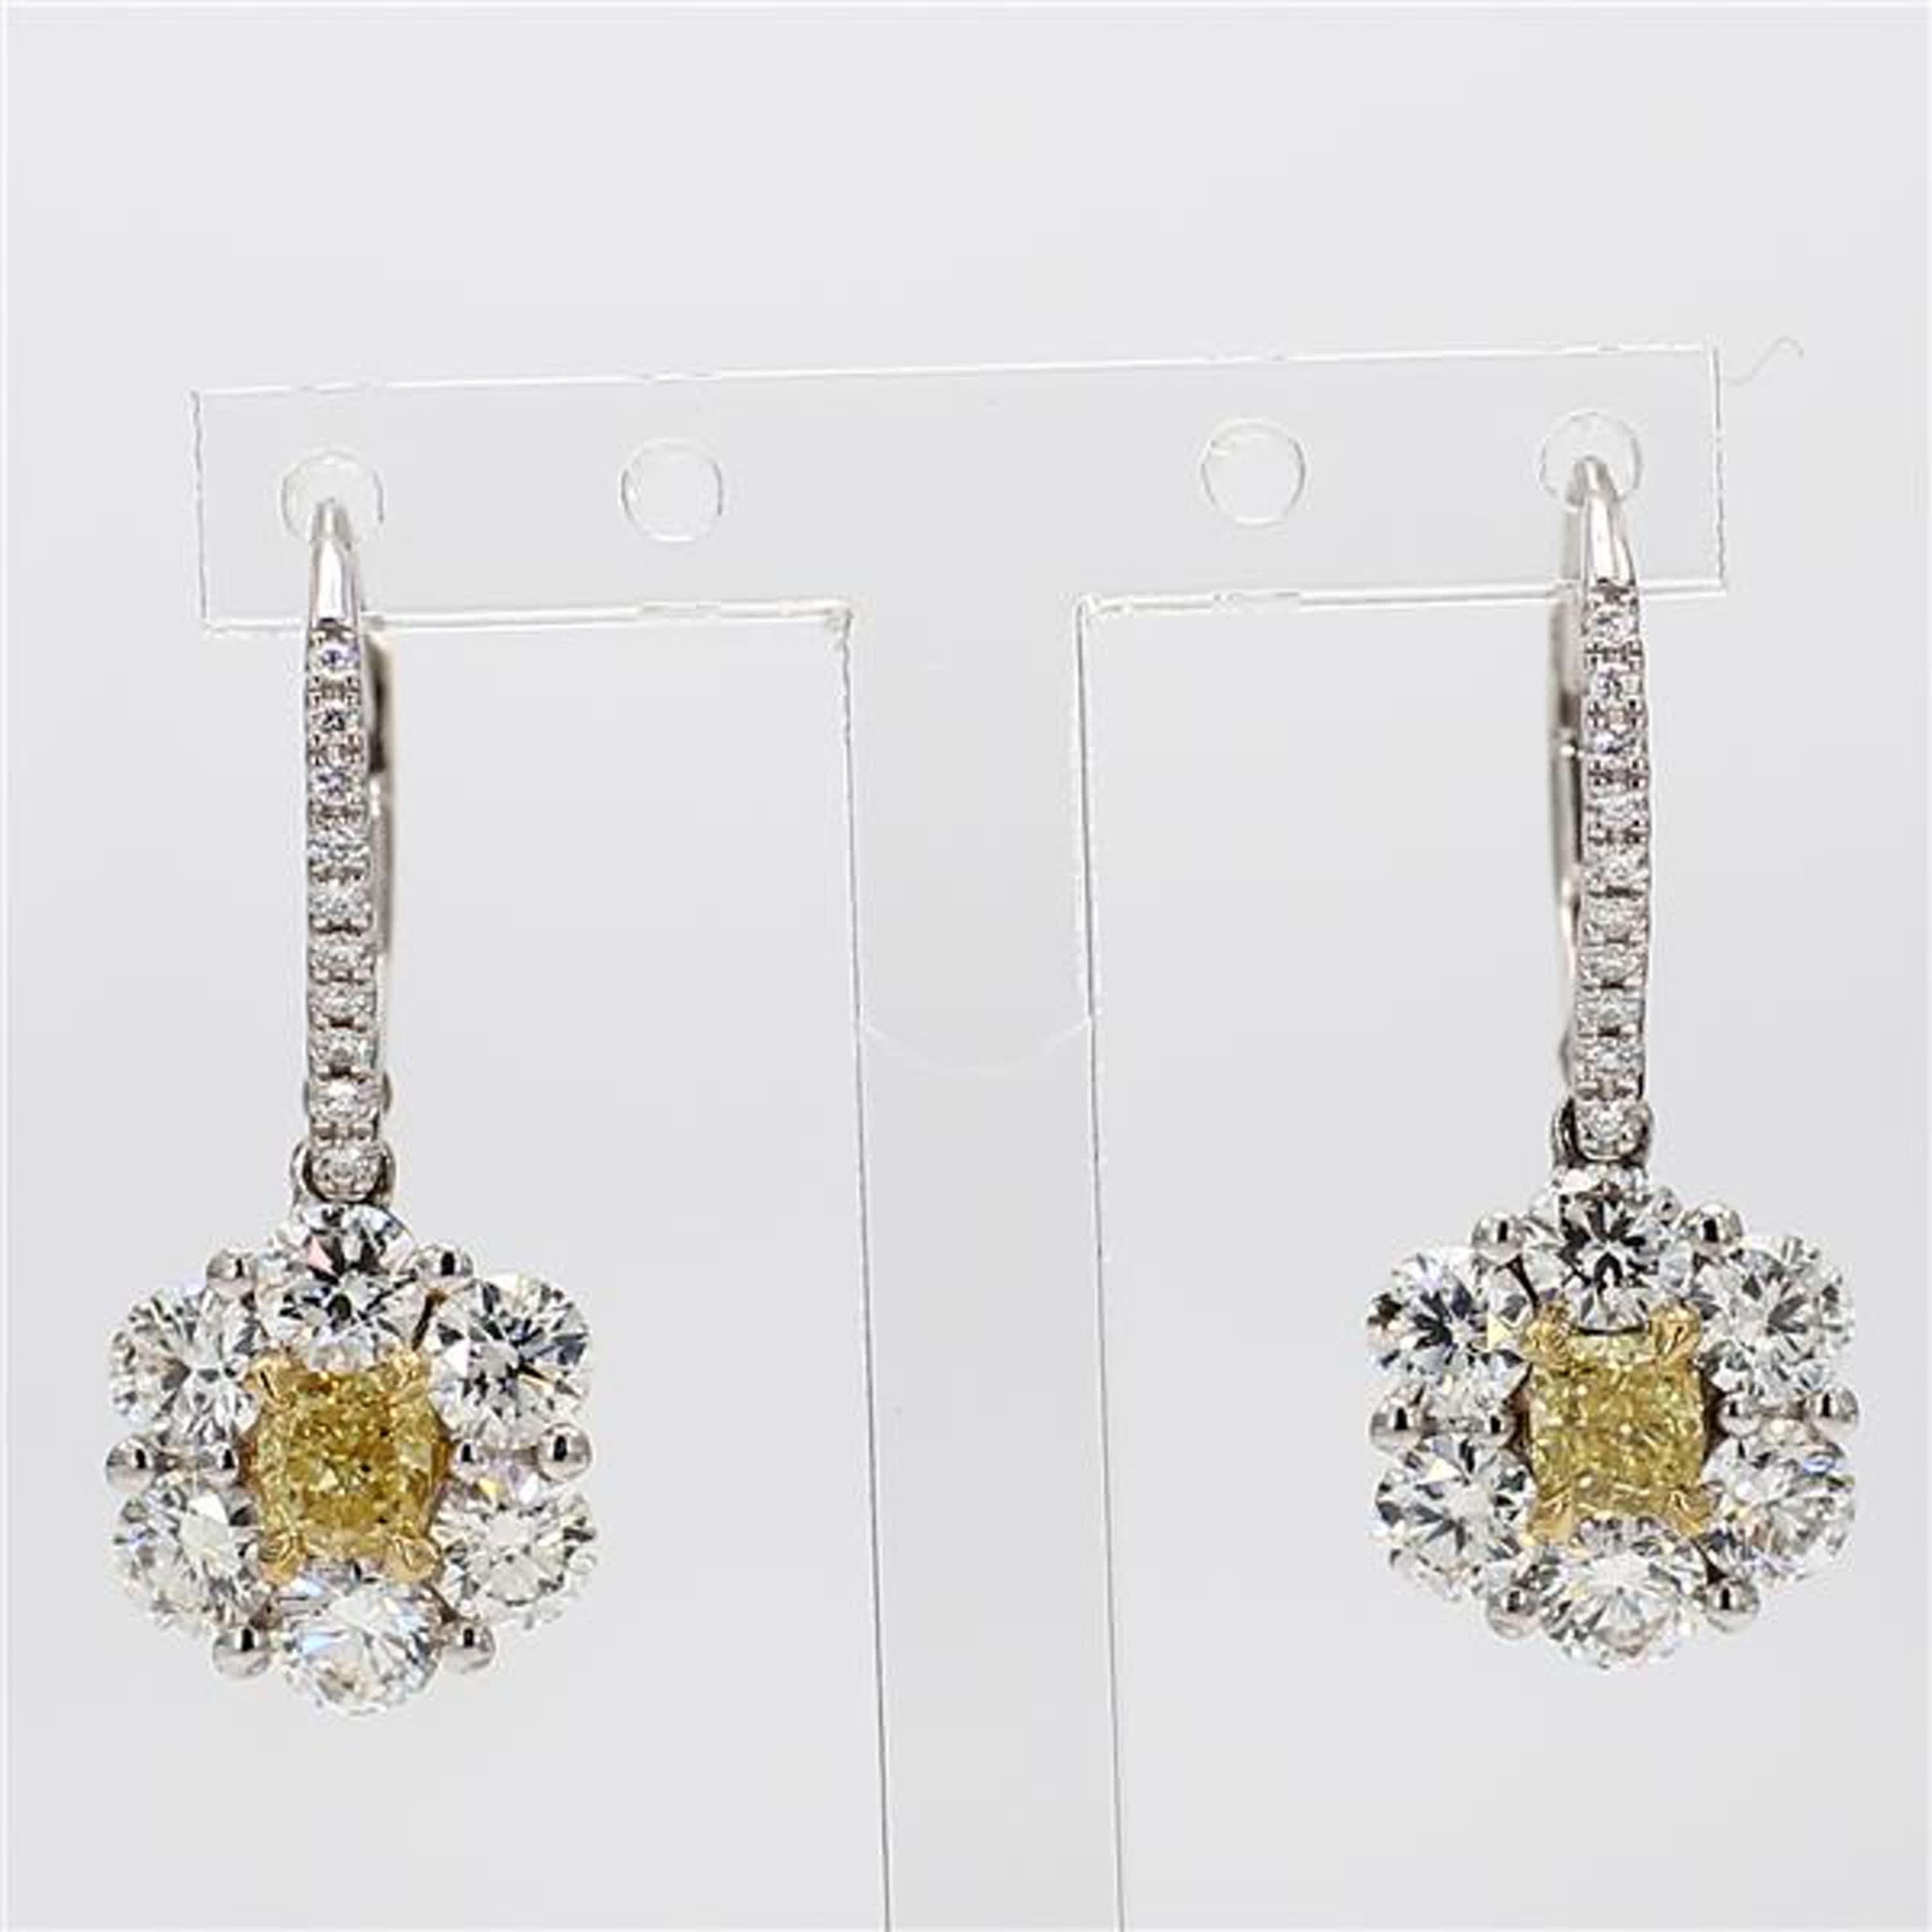 RareGemWorld's classic diamond earrings. Mounted in a beautiful 18K Yellow and White Gold setting with natural cushion cut yellow diamonds. The yellow diamonds are surrounded by large round natural white diamond melee as well as diamonds throughout